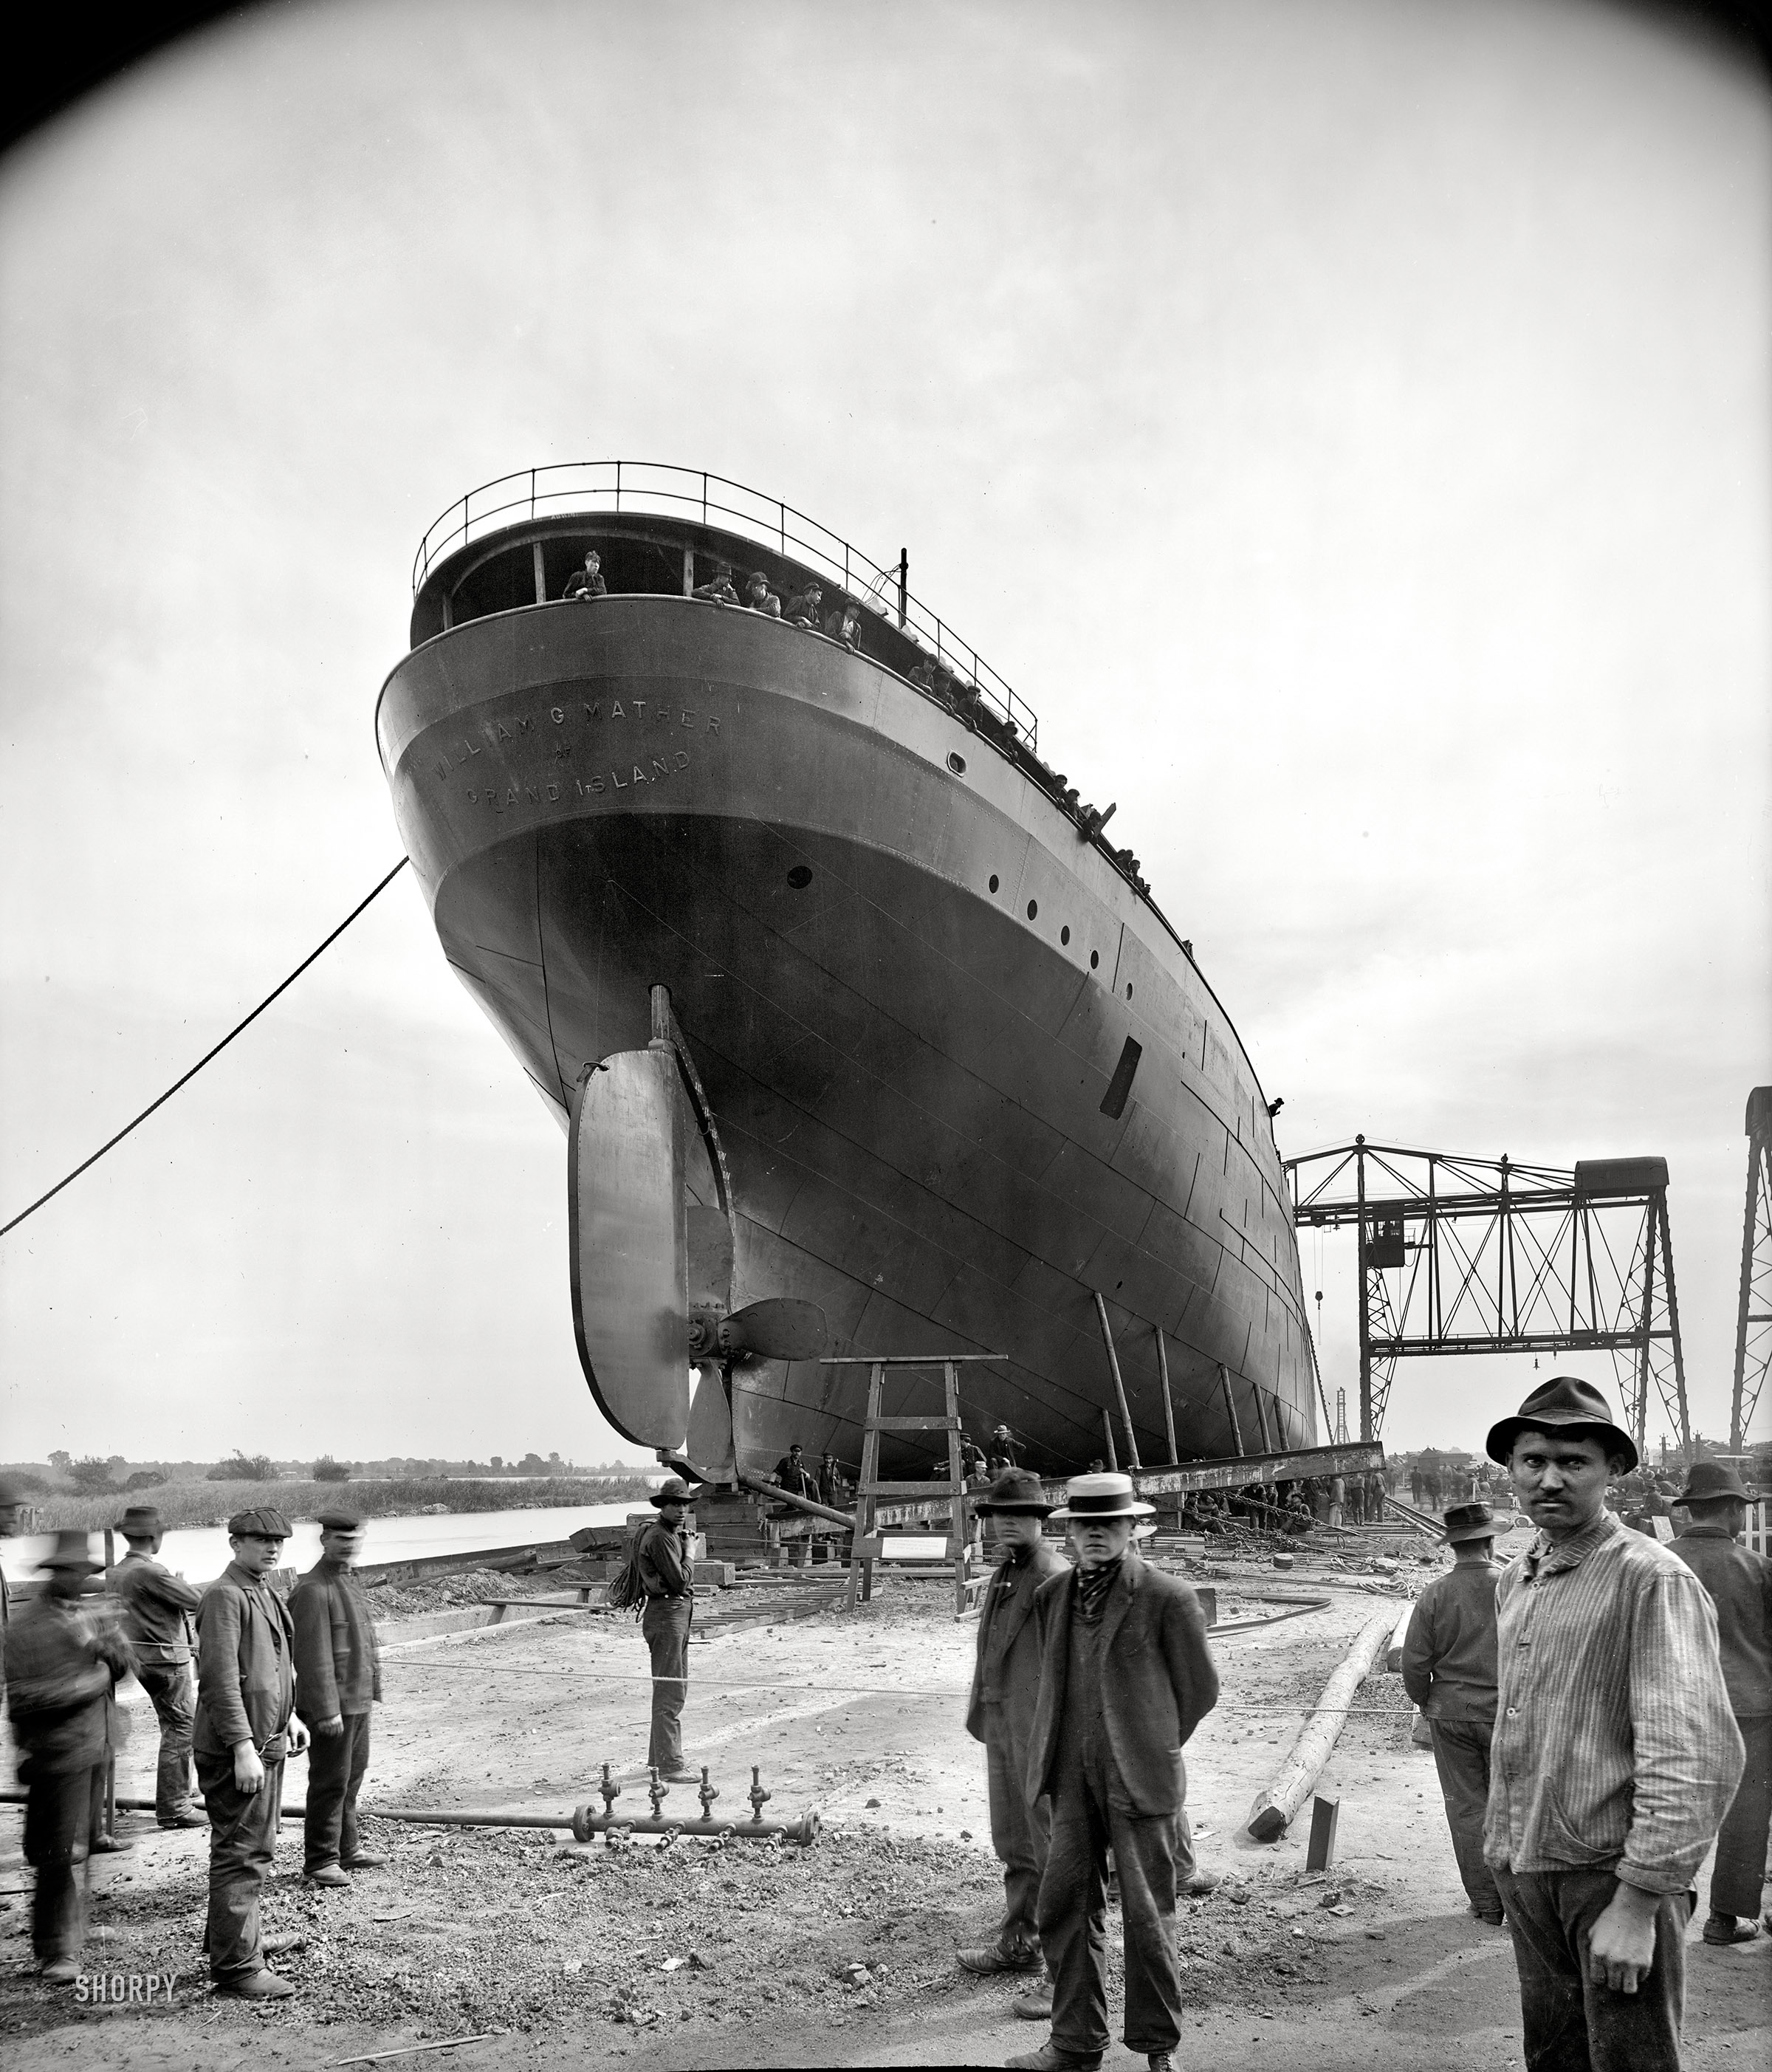 October 1905. Ecorse, Michigan. "S.S. William G. Mather -- stern view before launch." Our second look at this freighter on the ways at Great Lakes Engineering Works. 8x10 inch glass negative, Detroit Publishing Company. View full size.